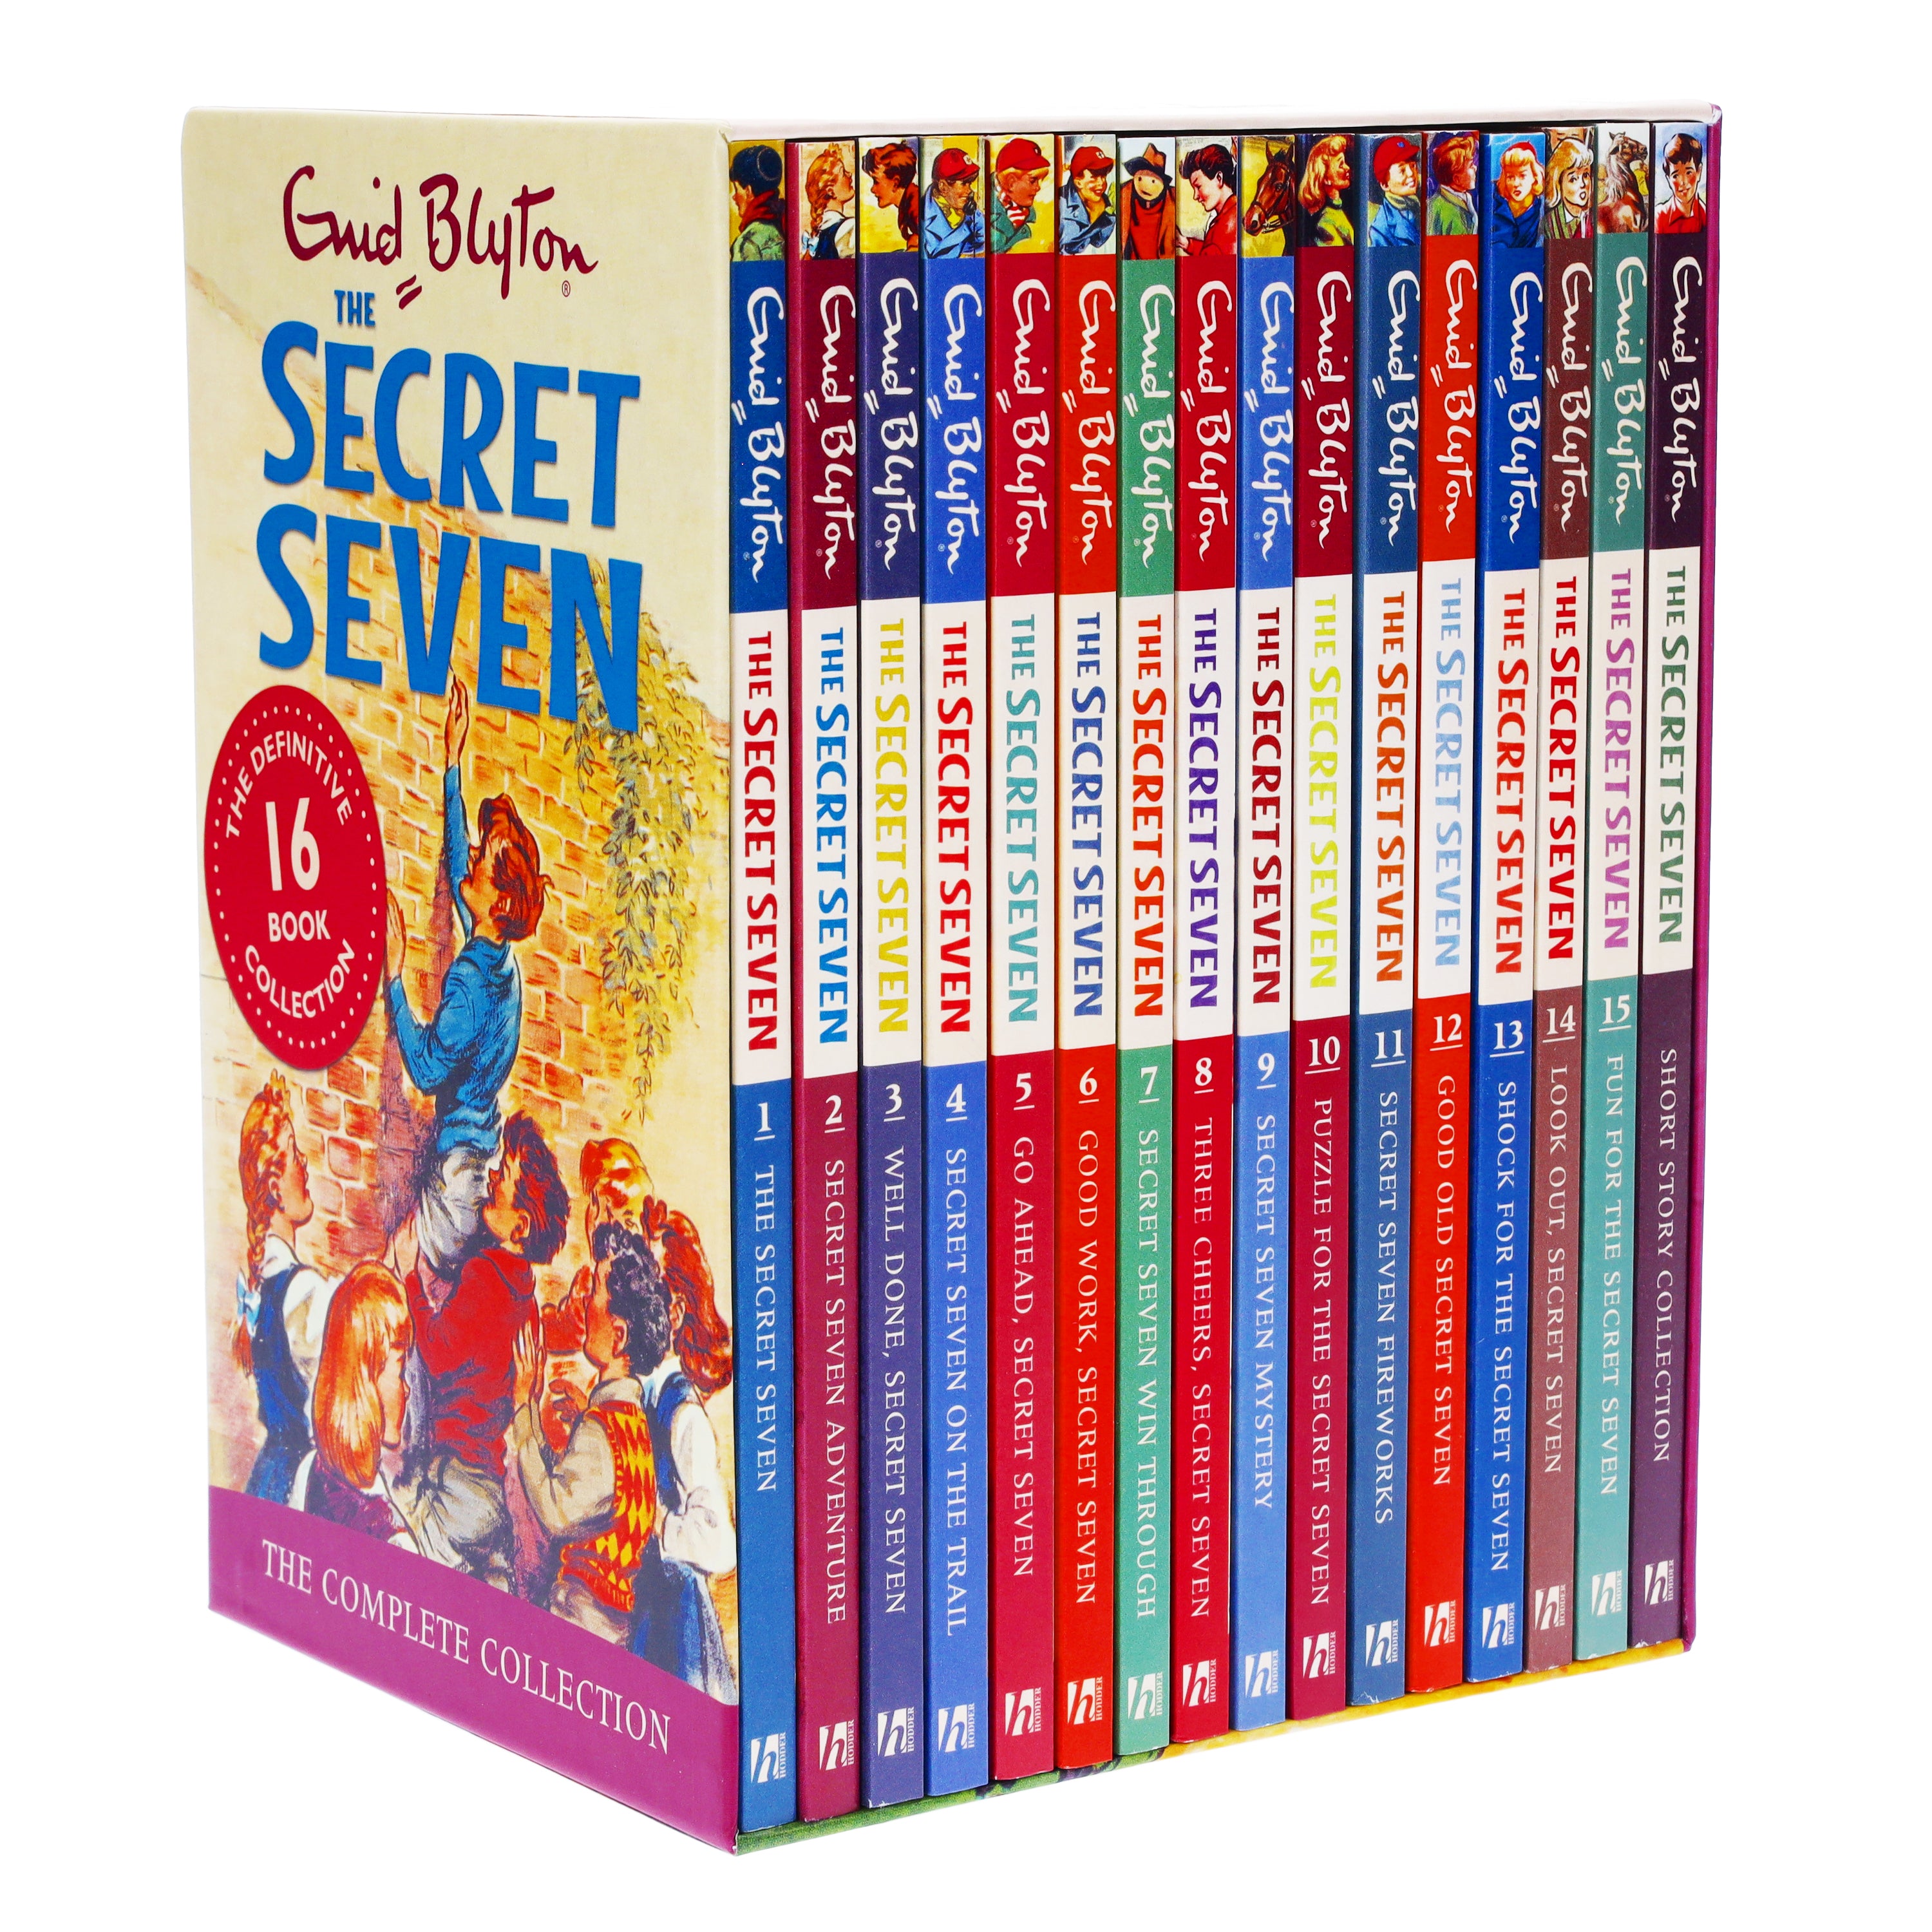 The Secret Seven Complete Collection 16 Books by Enid Blyton - Ages 6-9 - Paperback